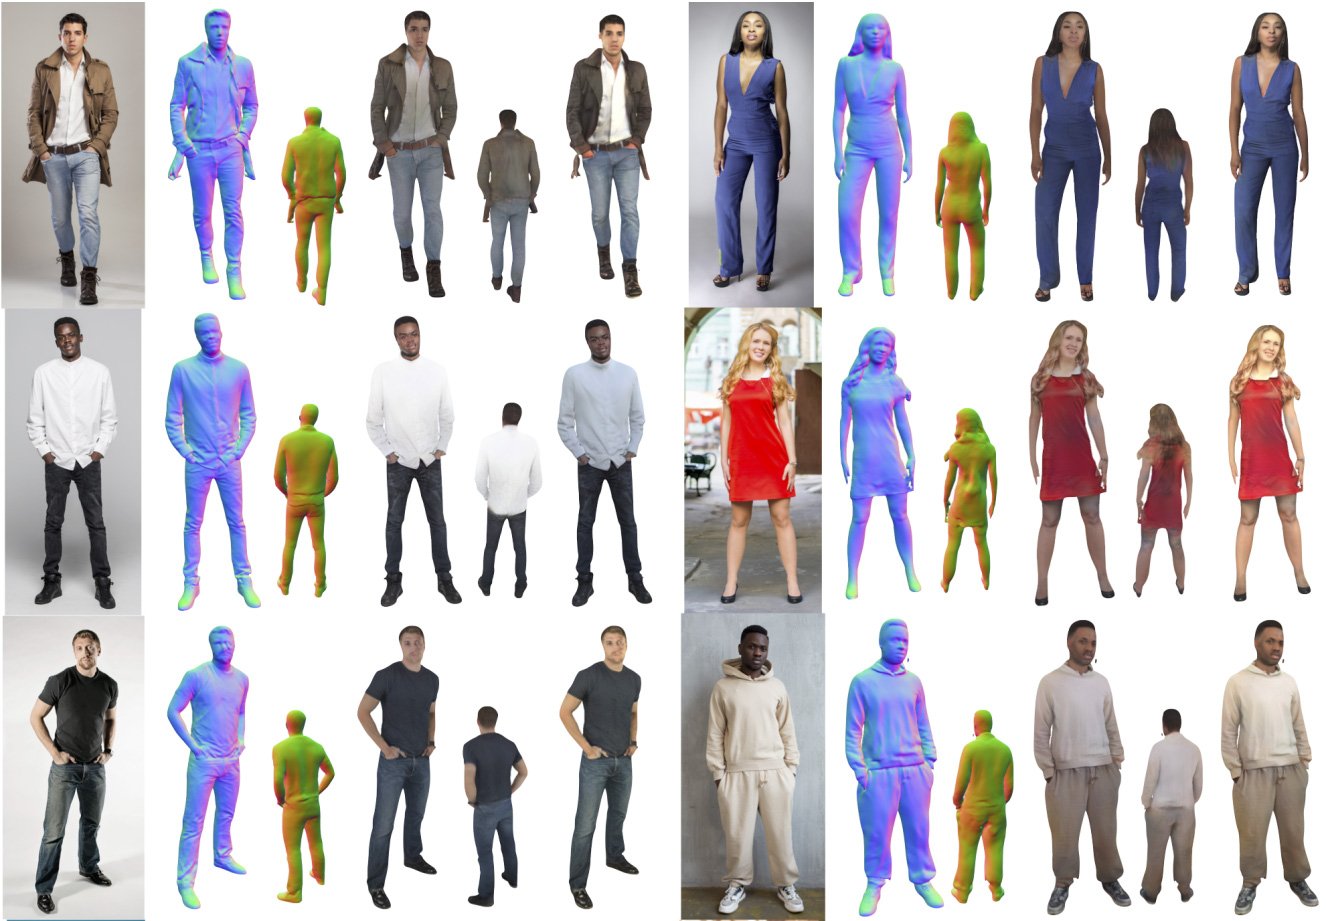 Google AI generates believable 3D avatars from a single photo